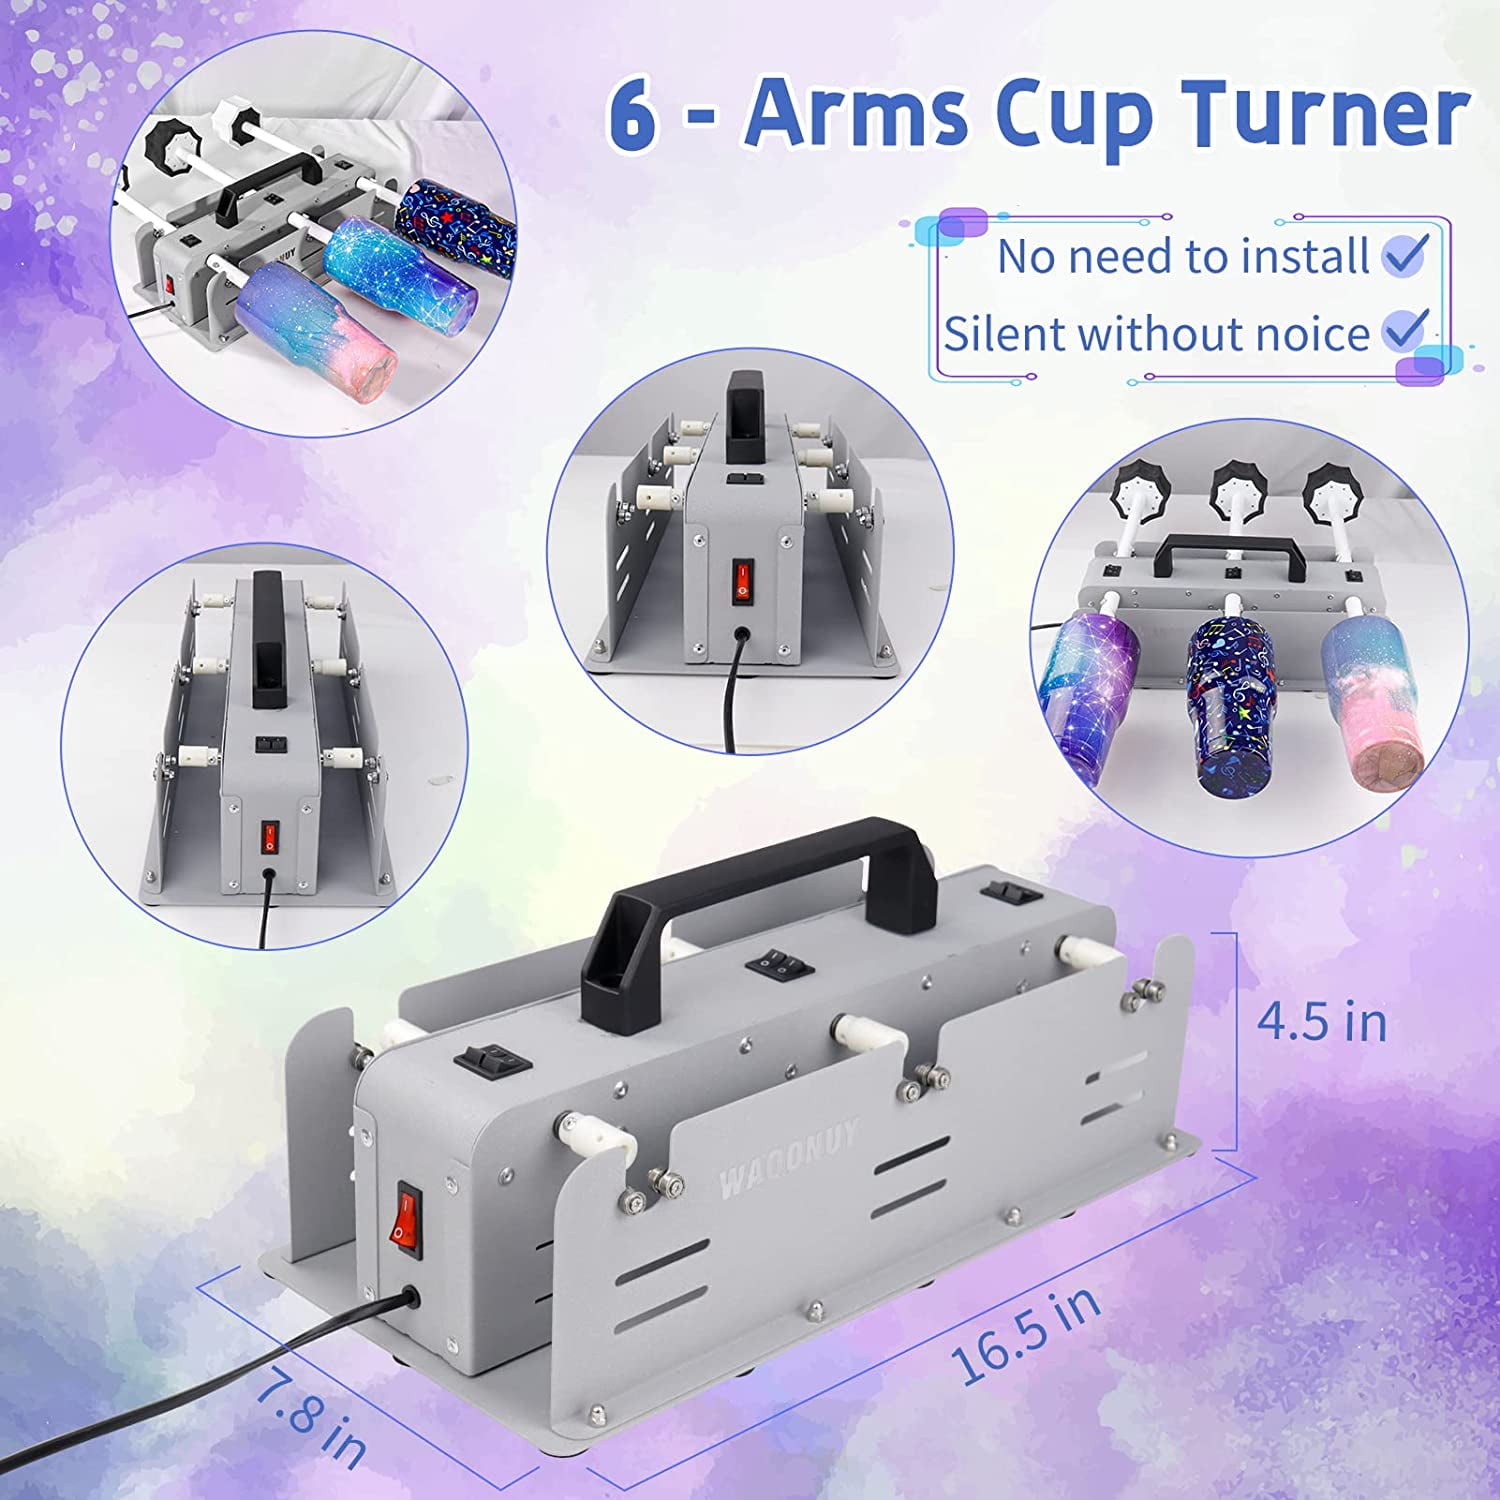 6 Cup Turner for Crafts Tumbler, Cup Turners for Tumblers Starter